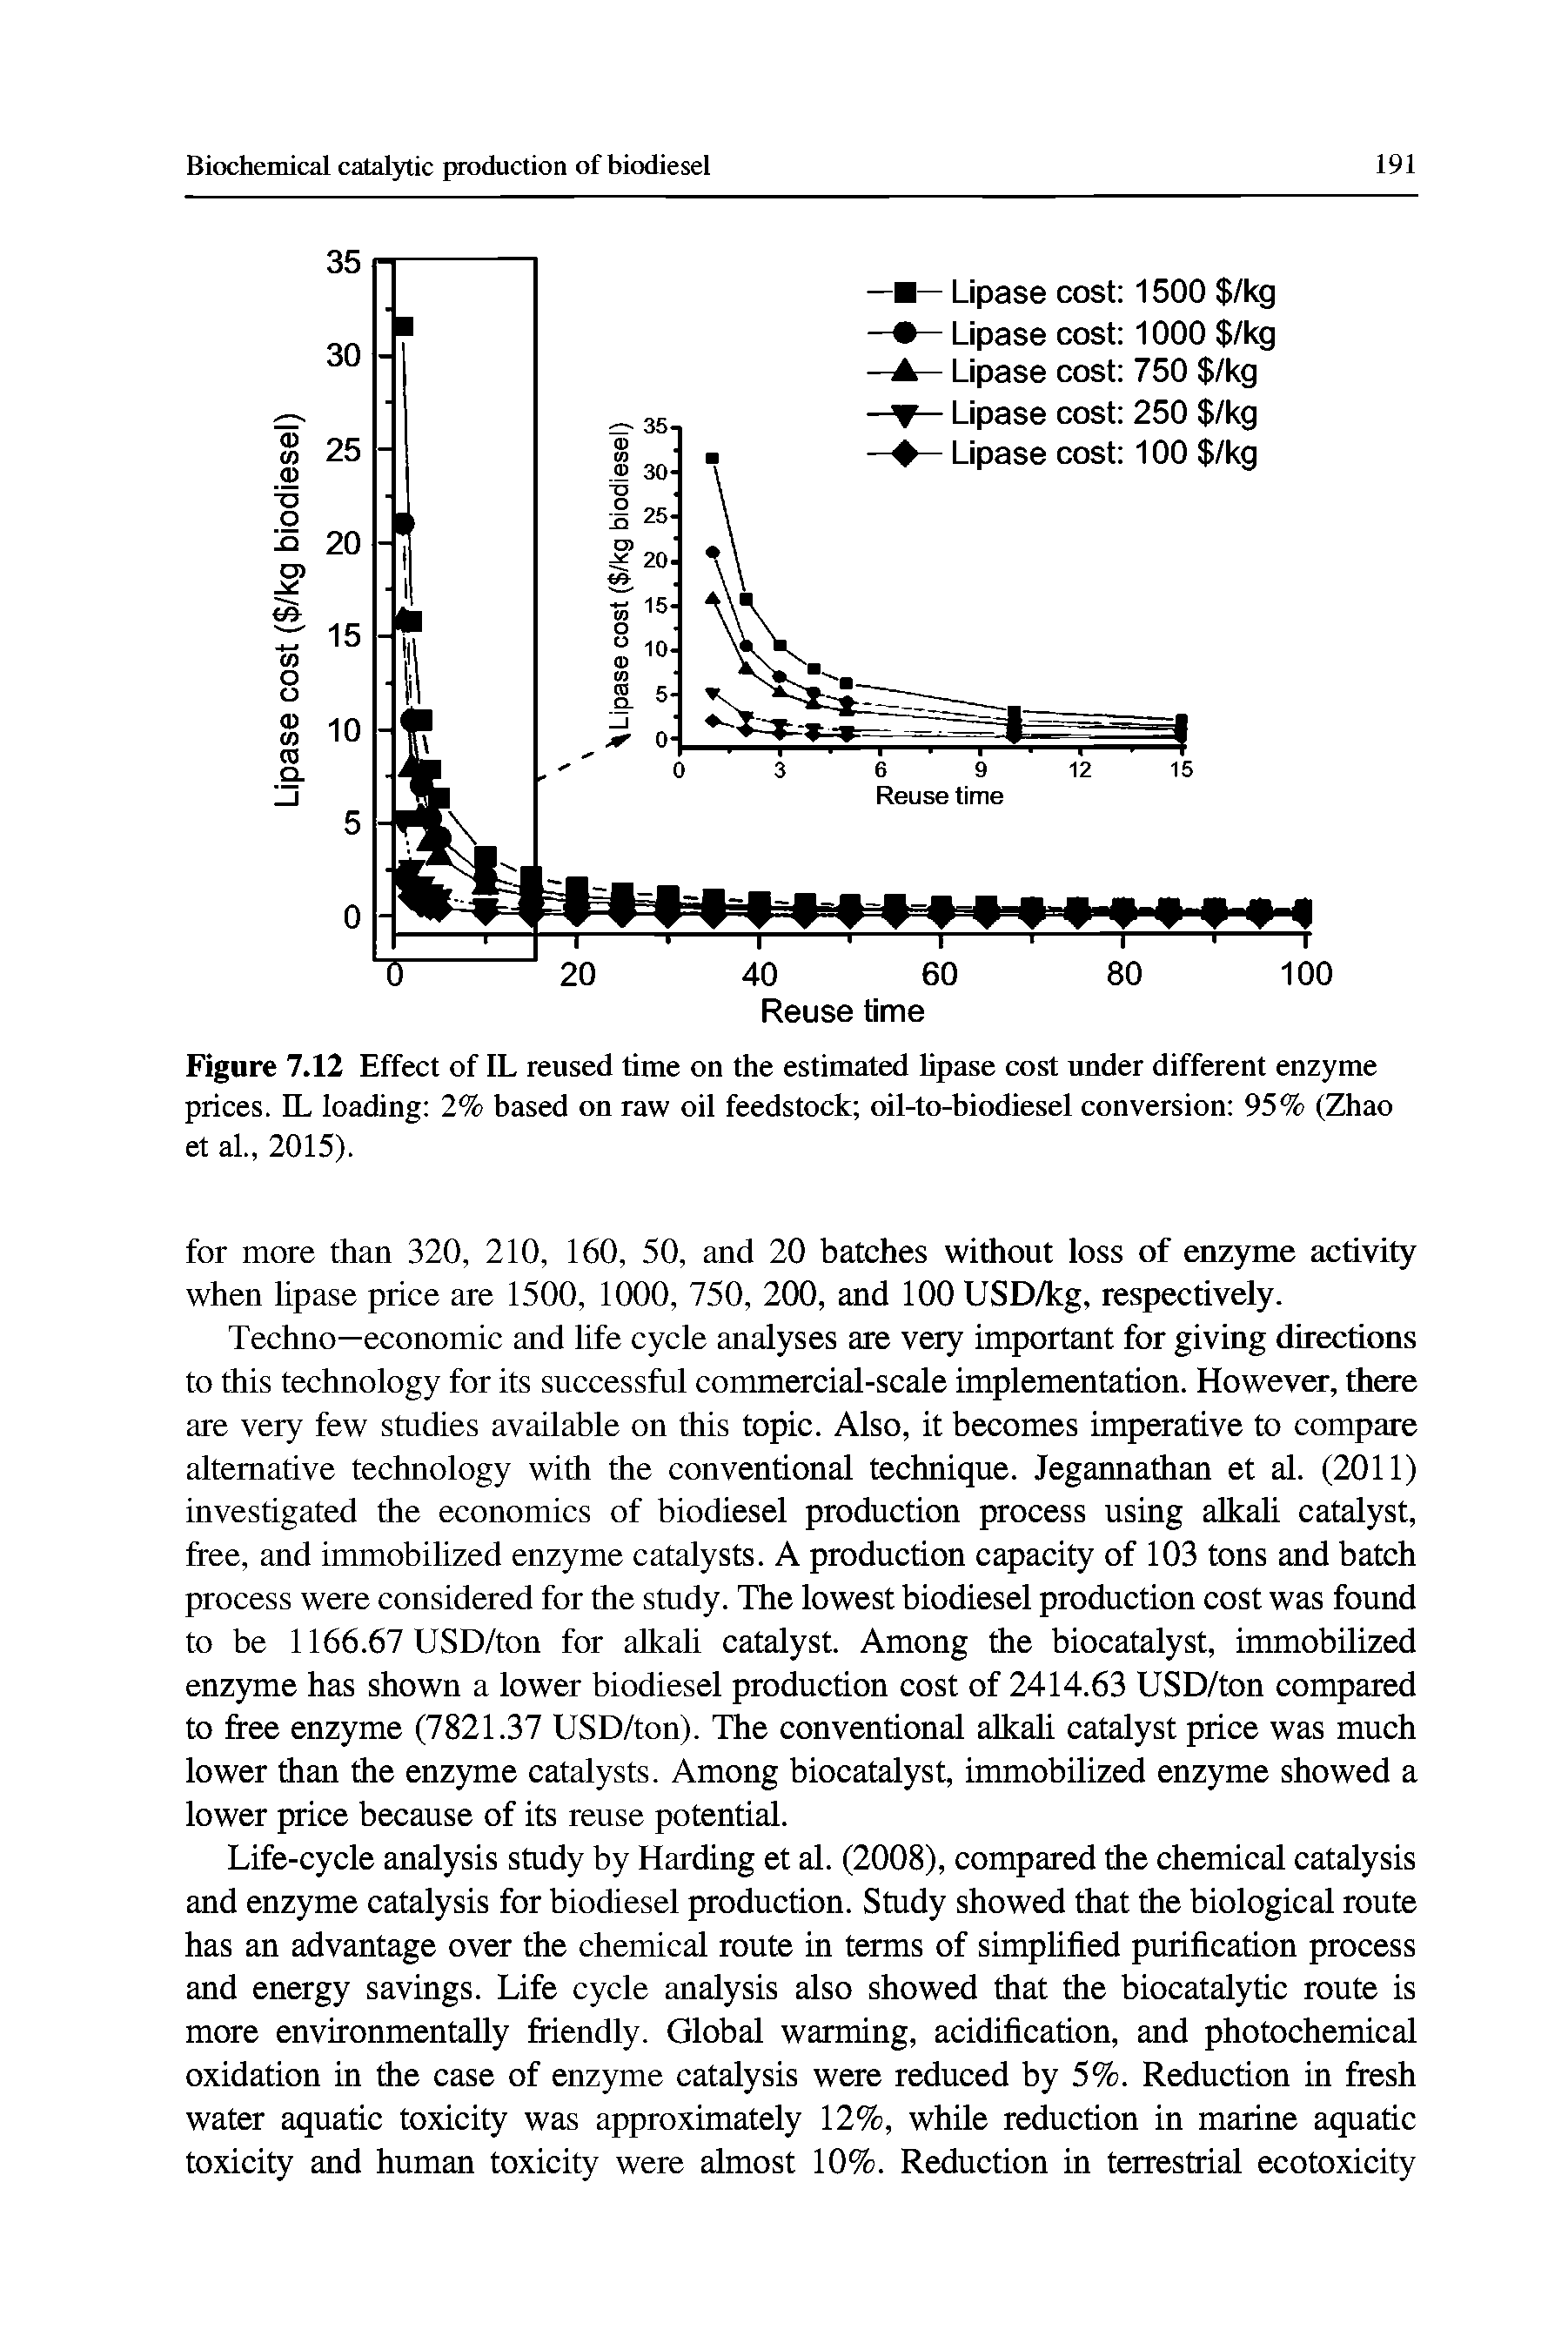 Figure 7.12 Effect of IL reused time on the estimated lipase cost under different enzyme prices. IL loading 2% based on raw oil feedstock oil-to-biodiesel conversion 95% (Zhao et al, 2015).